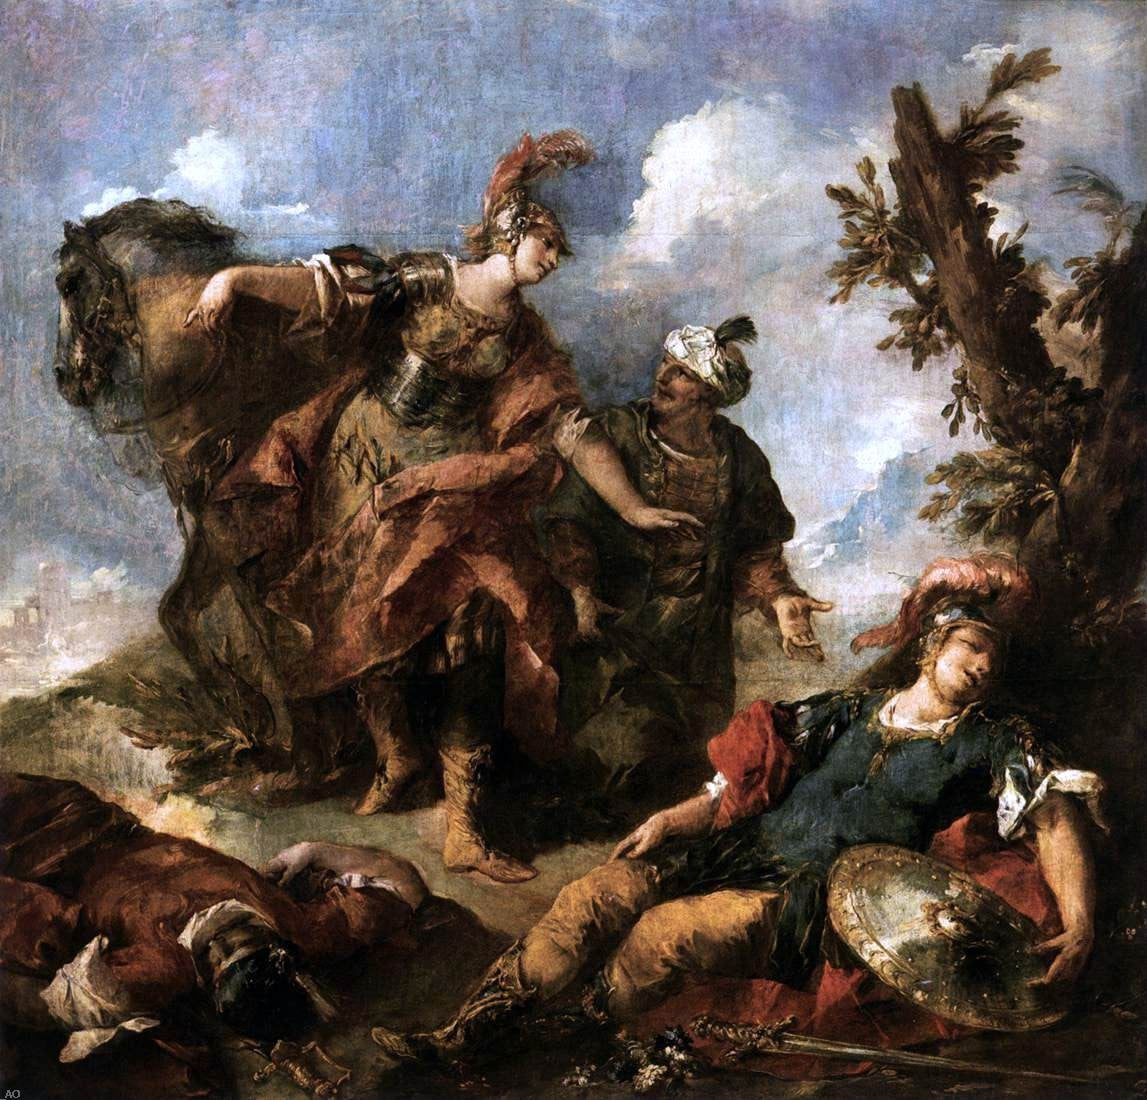  Giovanni Antonio Guardi Herminia and Vaprino Find the Wounded Tancred - Hand Painted Oil Painting